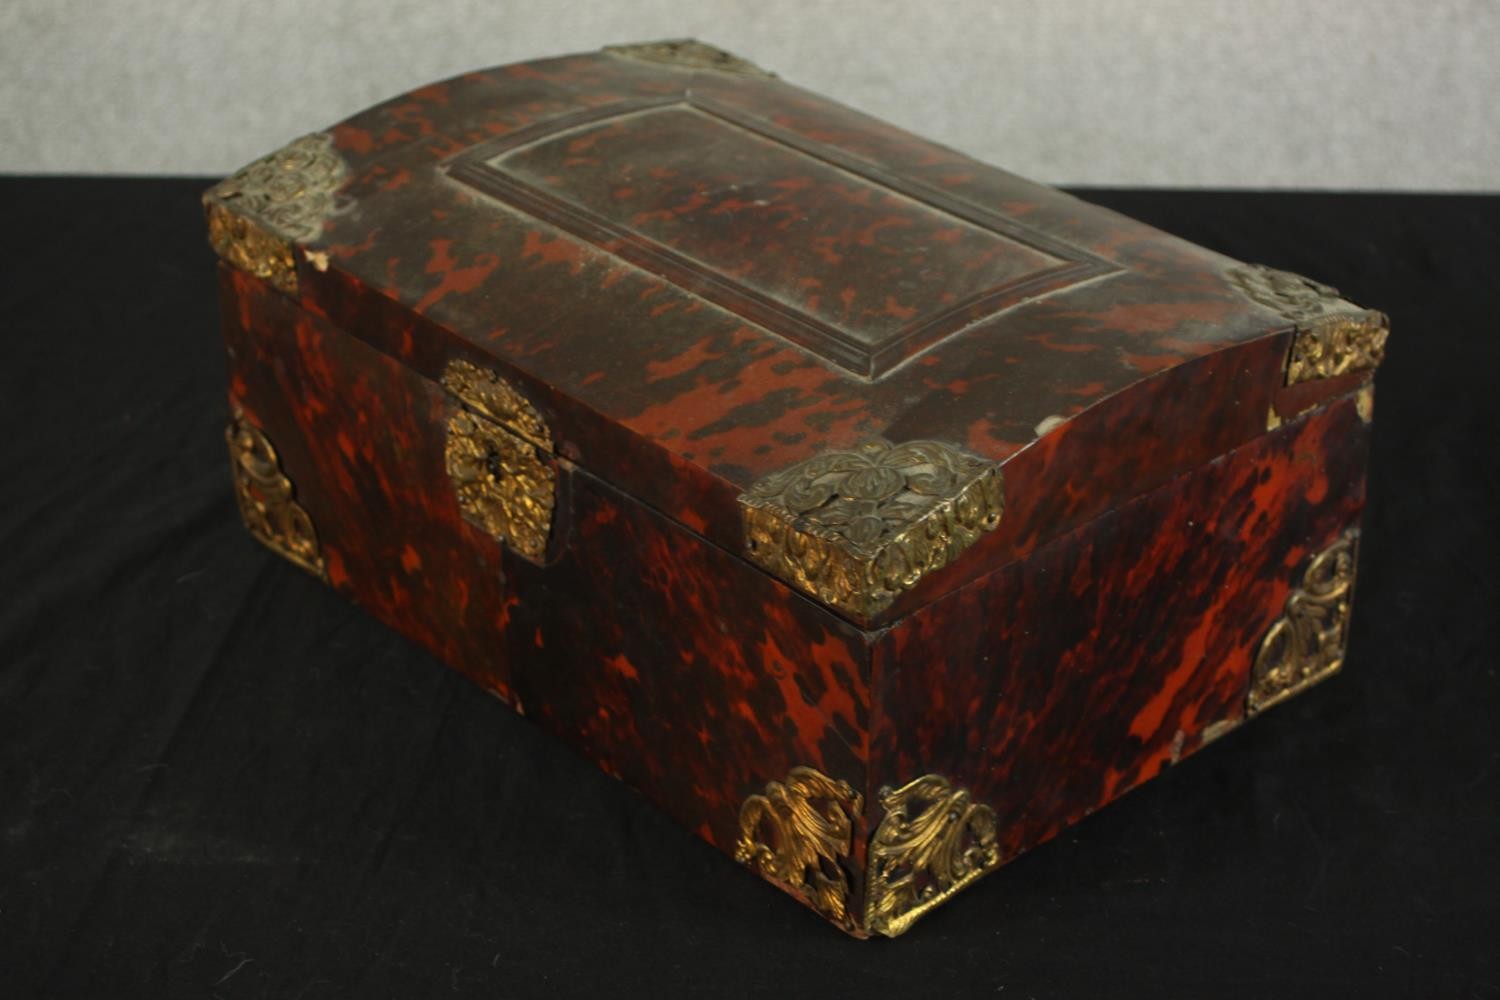 A 19th century tortoiseshell mounted dome topped box with brass mounts, opening to reveal velvet - Image 3 of 8